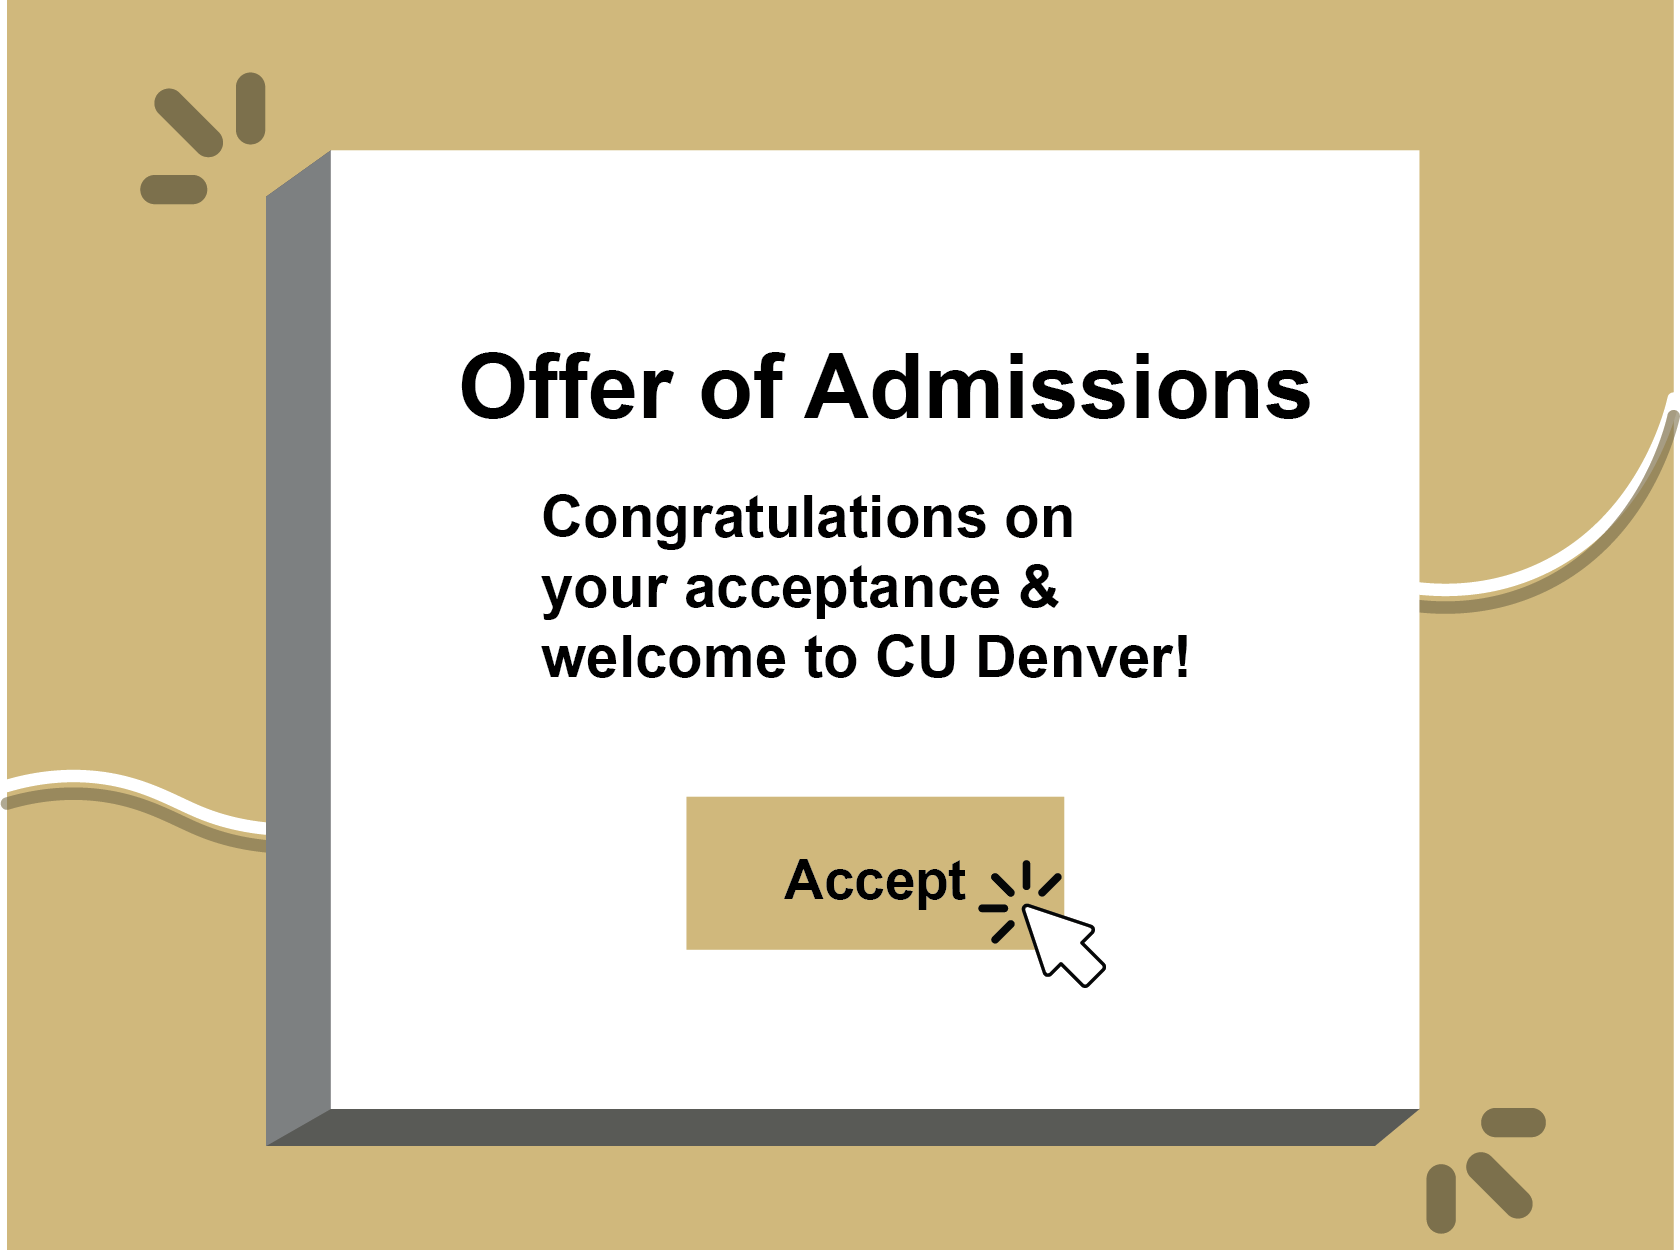 Offer of admissions congratulations on your acceptance and welcome to CU Denver